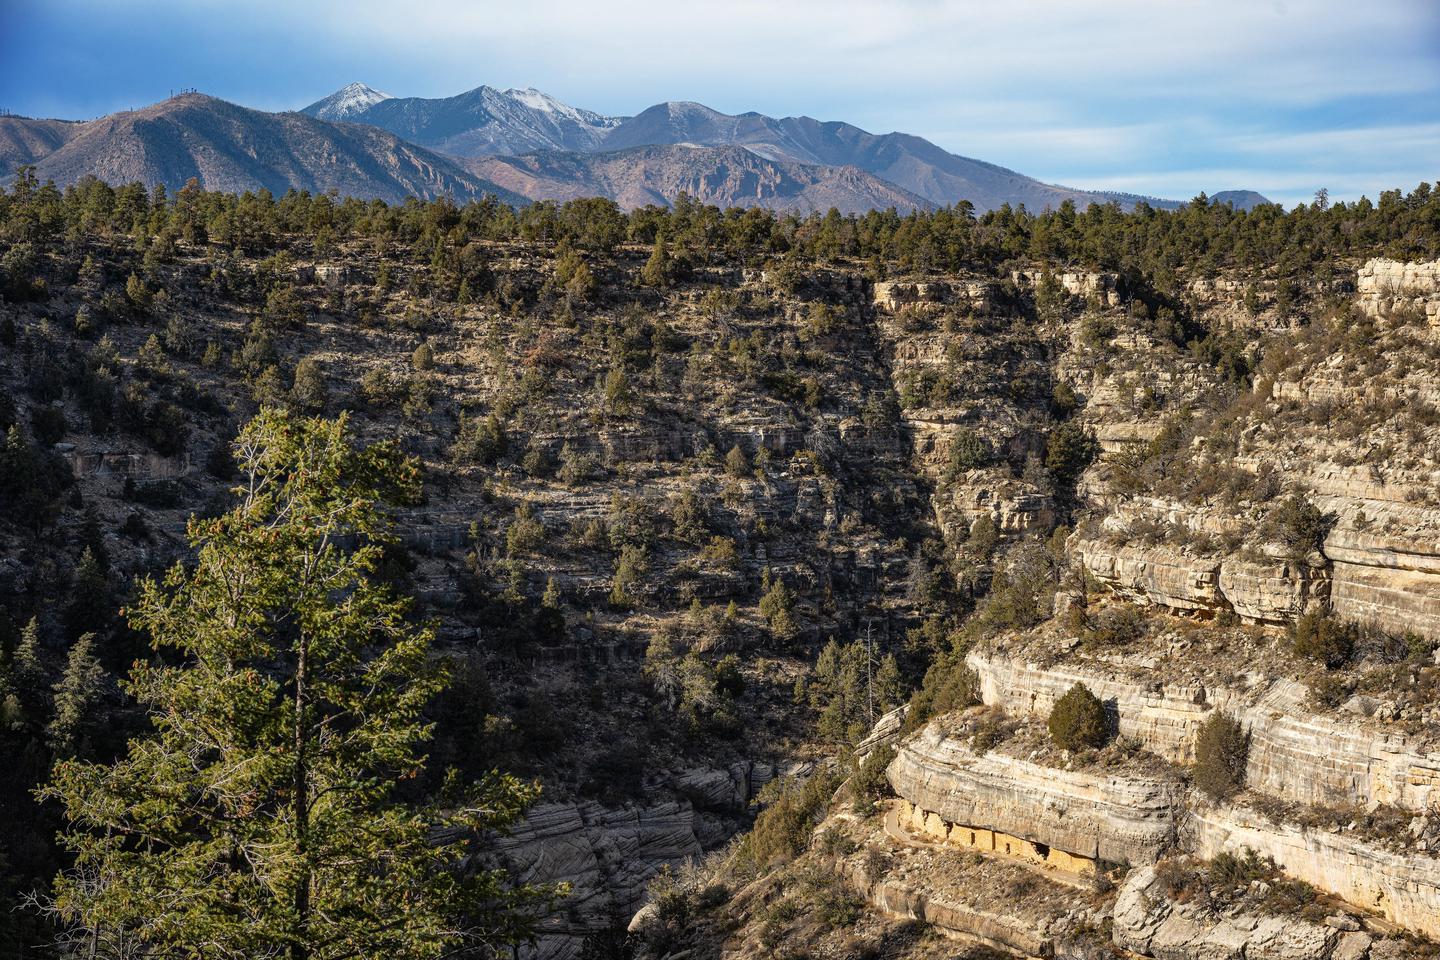 Preview photo of Walnut Canyon National Monument